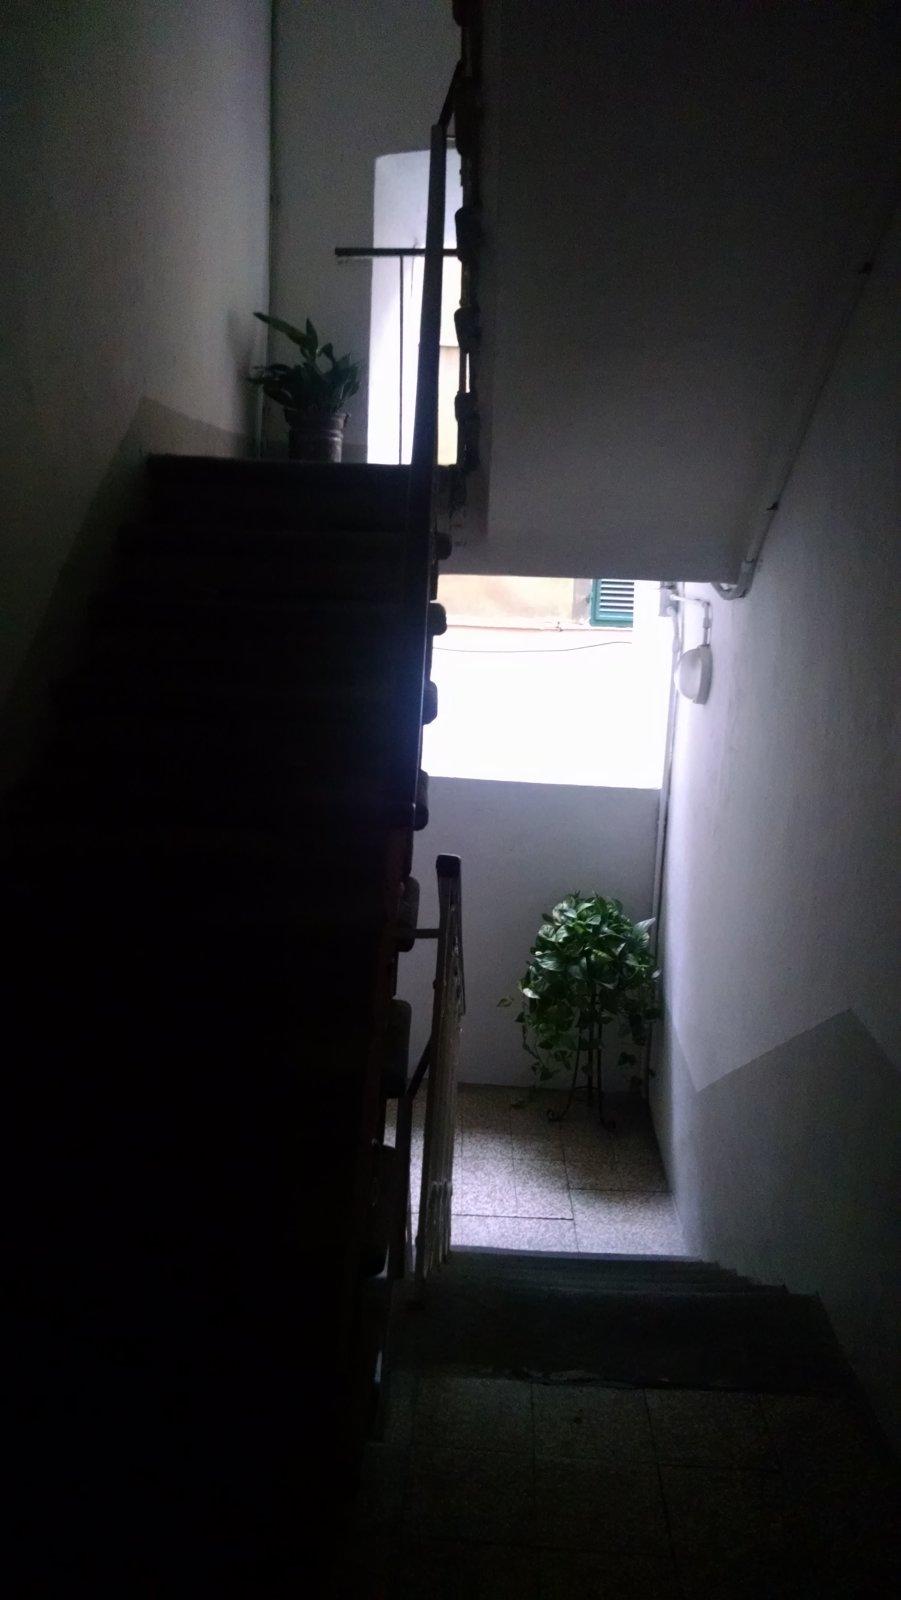 The stairwell up to the apartment.